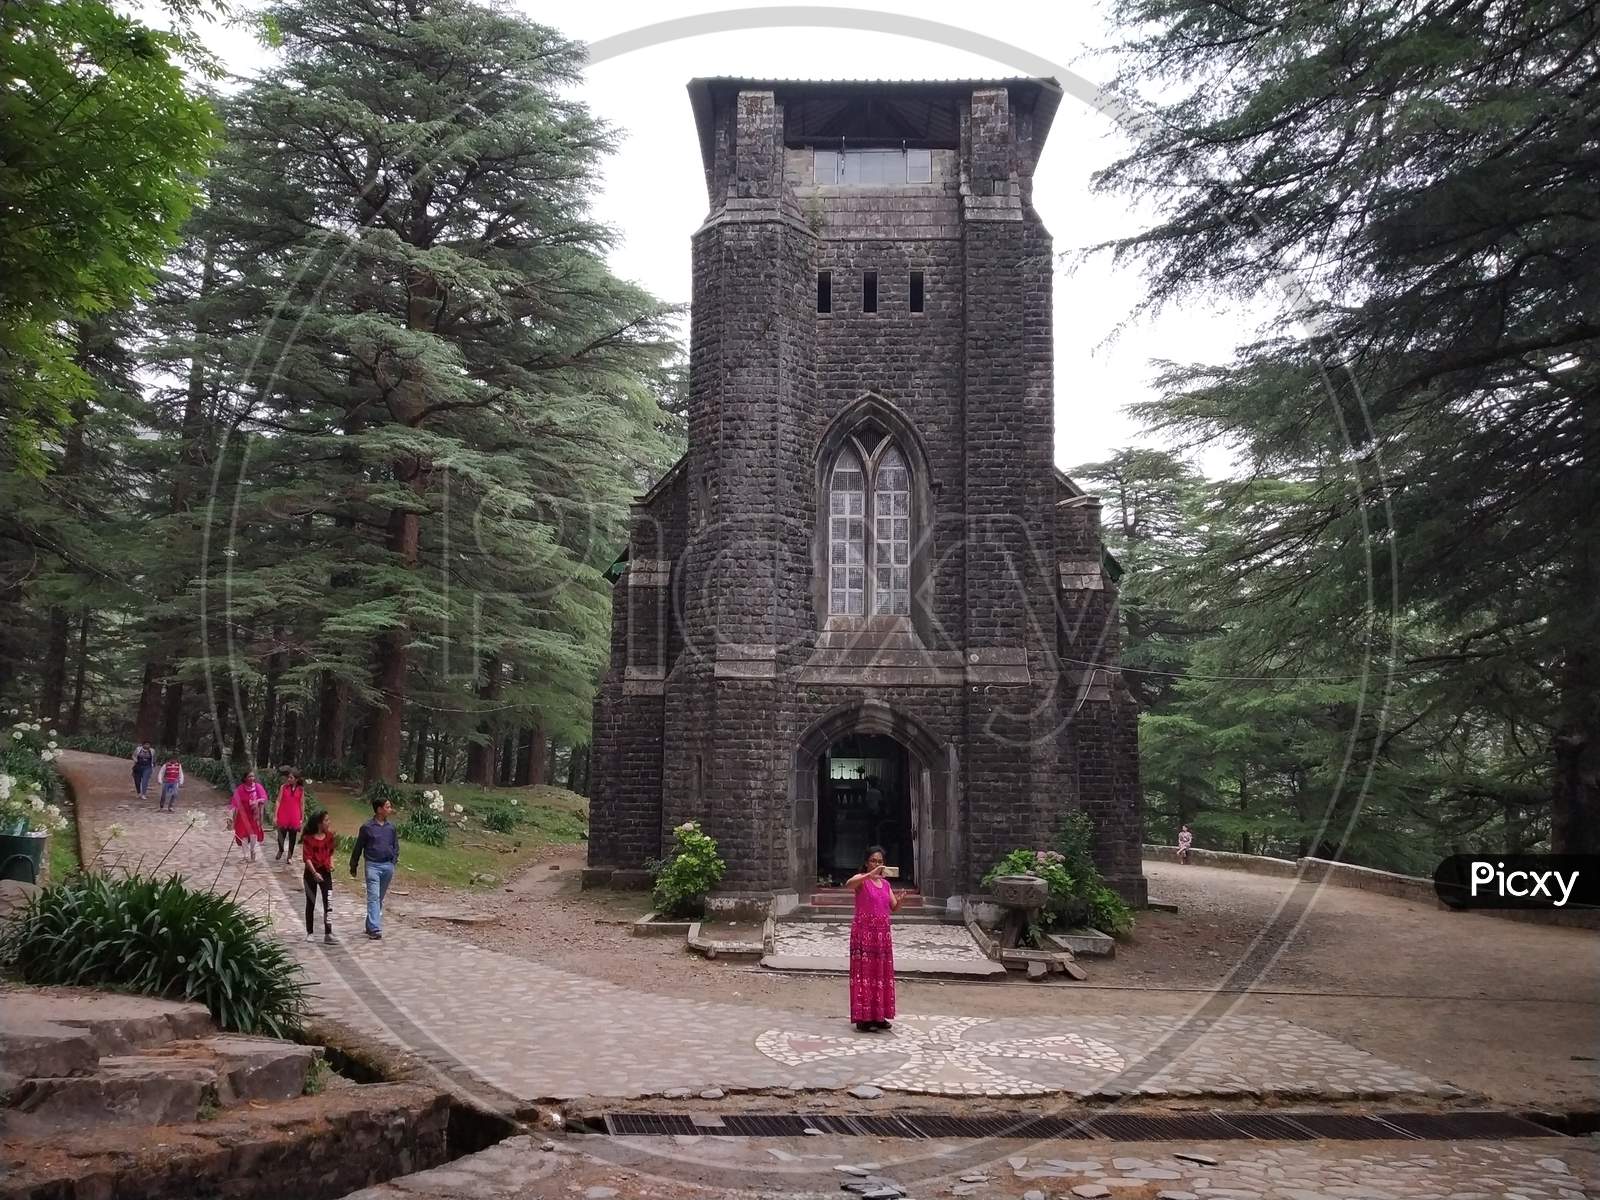 outside view of St. John in the Wilderness Church in India Himalayas mountains Dharamshala Mcleodganj triund Himachal Pradesh